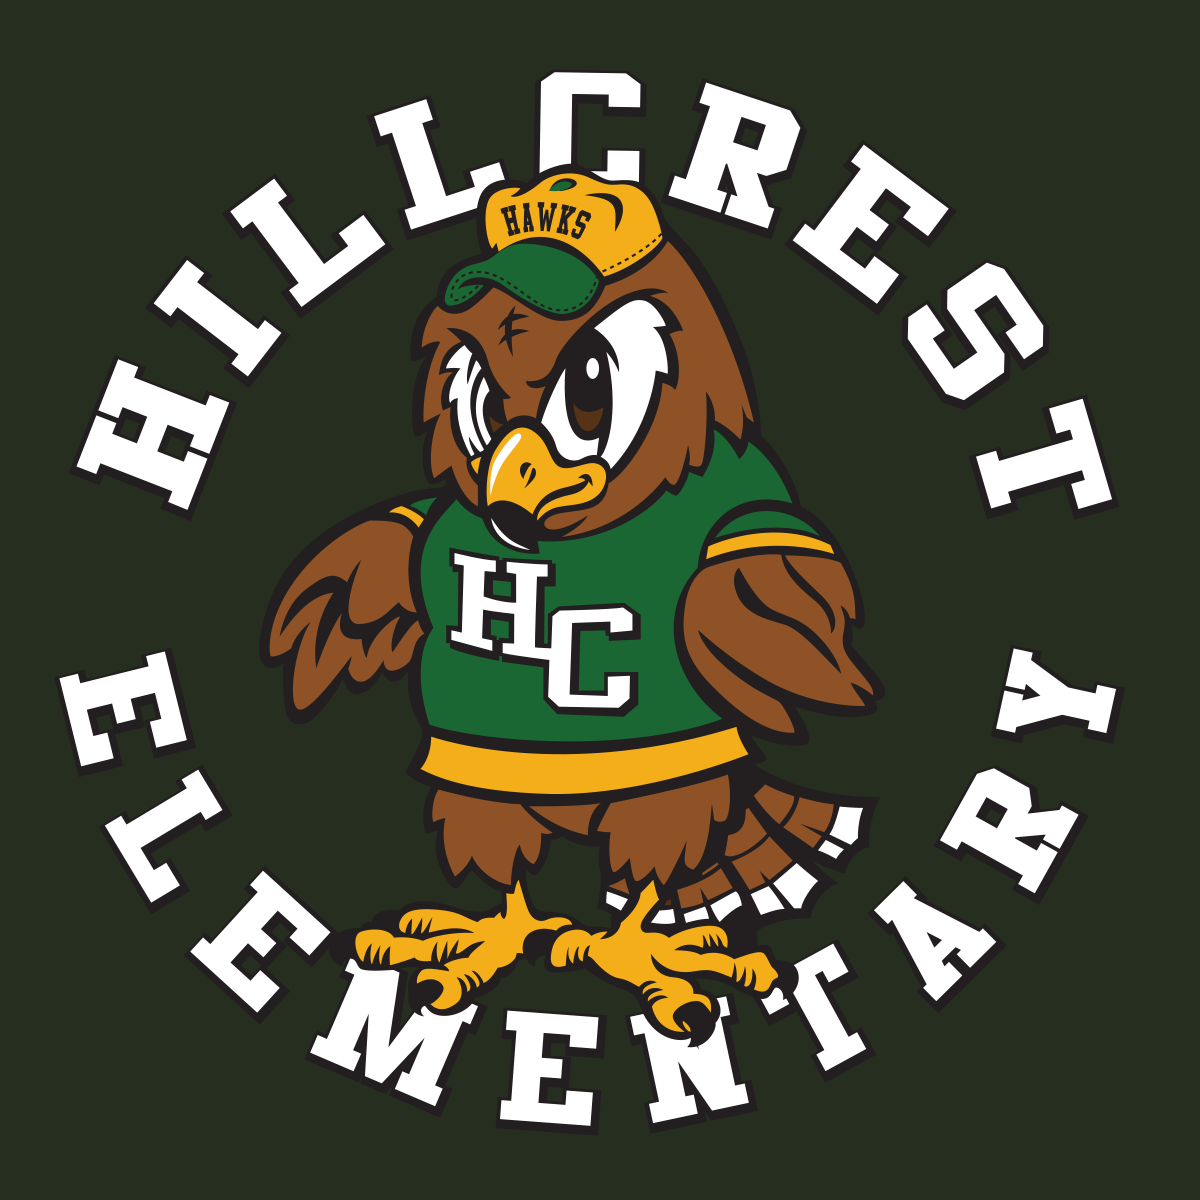 CLEARANCE - Hillcrest Basic Student T-Shirt - Forest Green